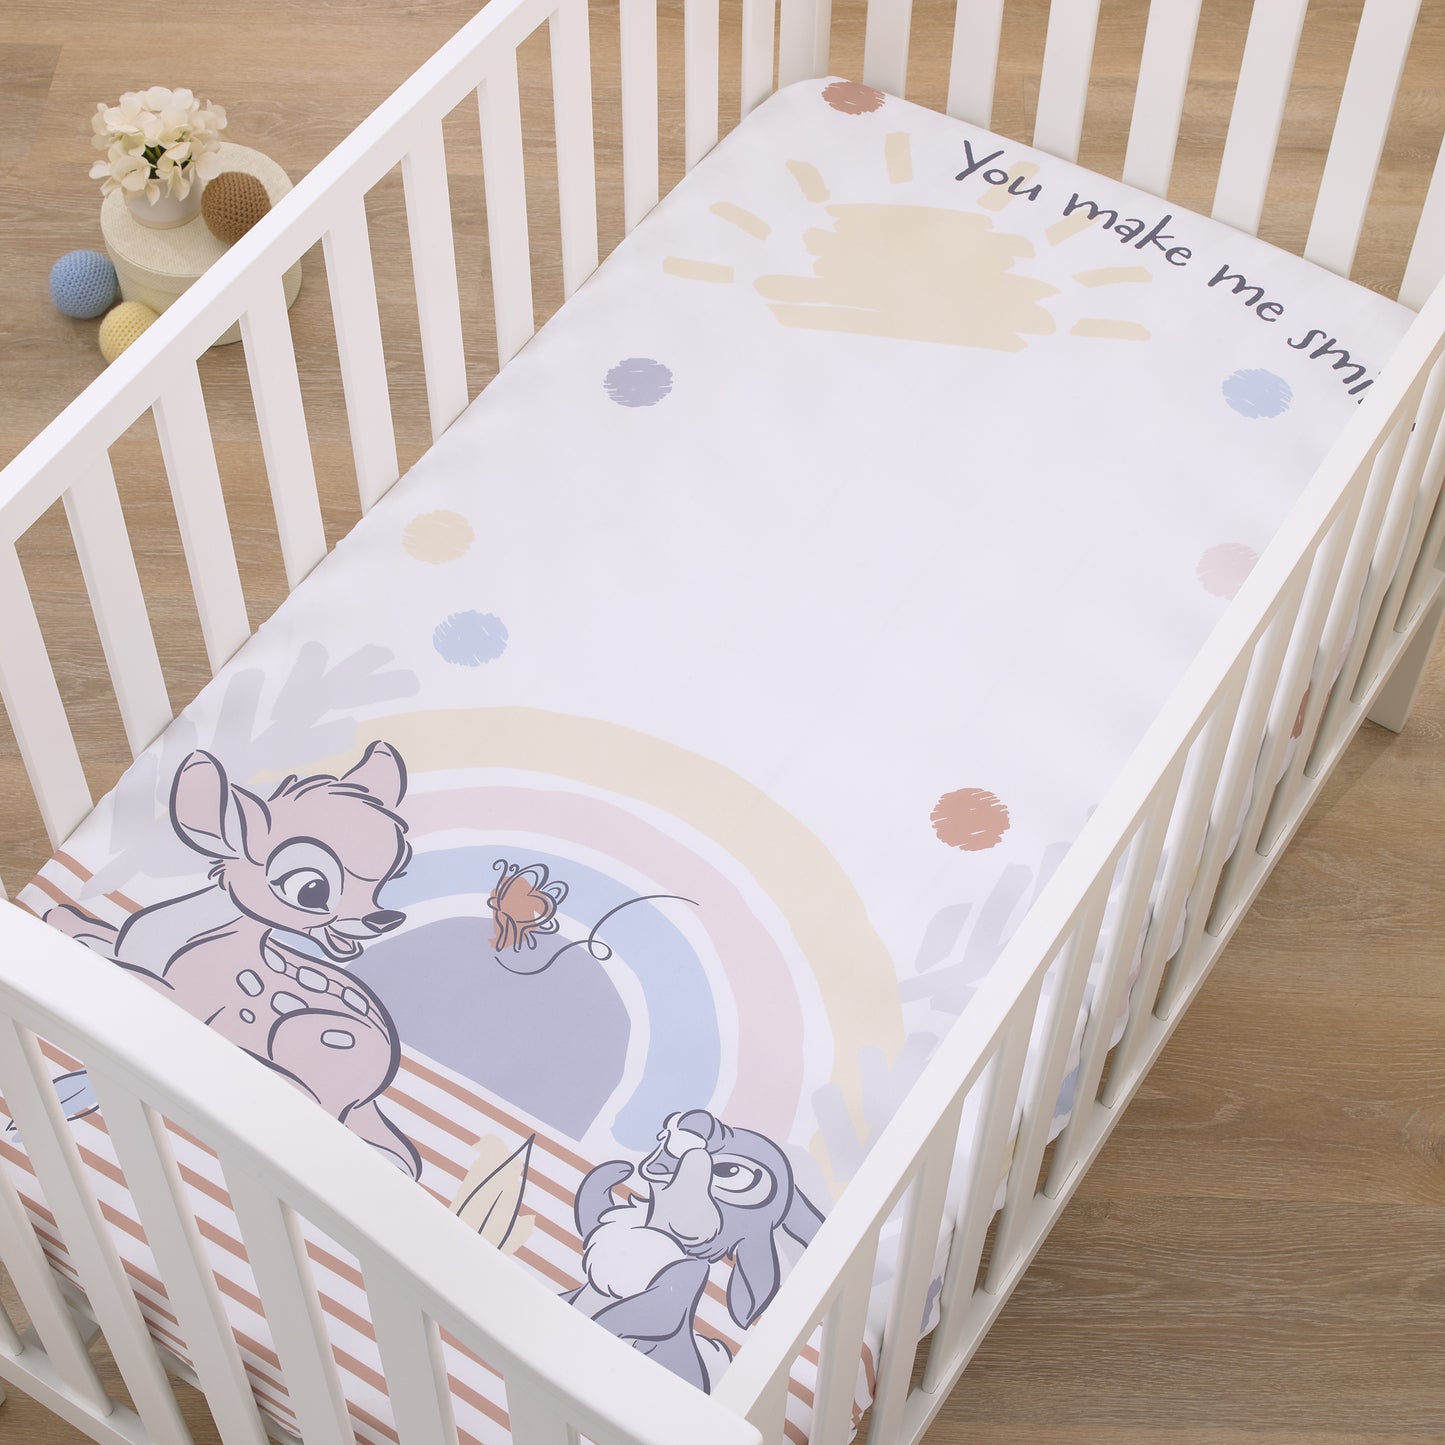 Disney B is for Bambi Tan, Gray, Blue, and White You Make Me Smile Photo Op Fitted Crib Sheet